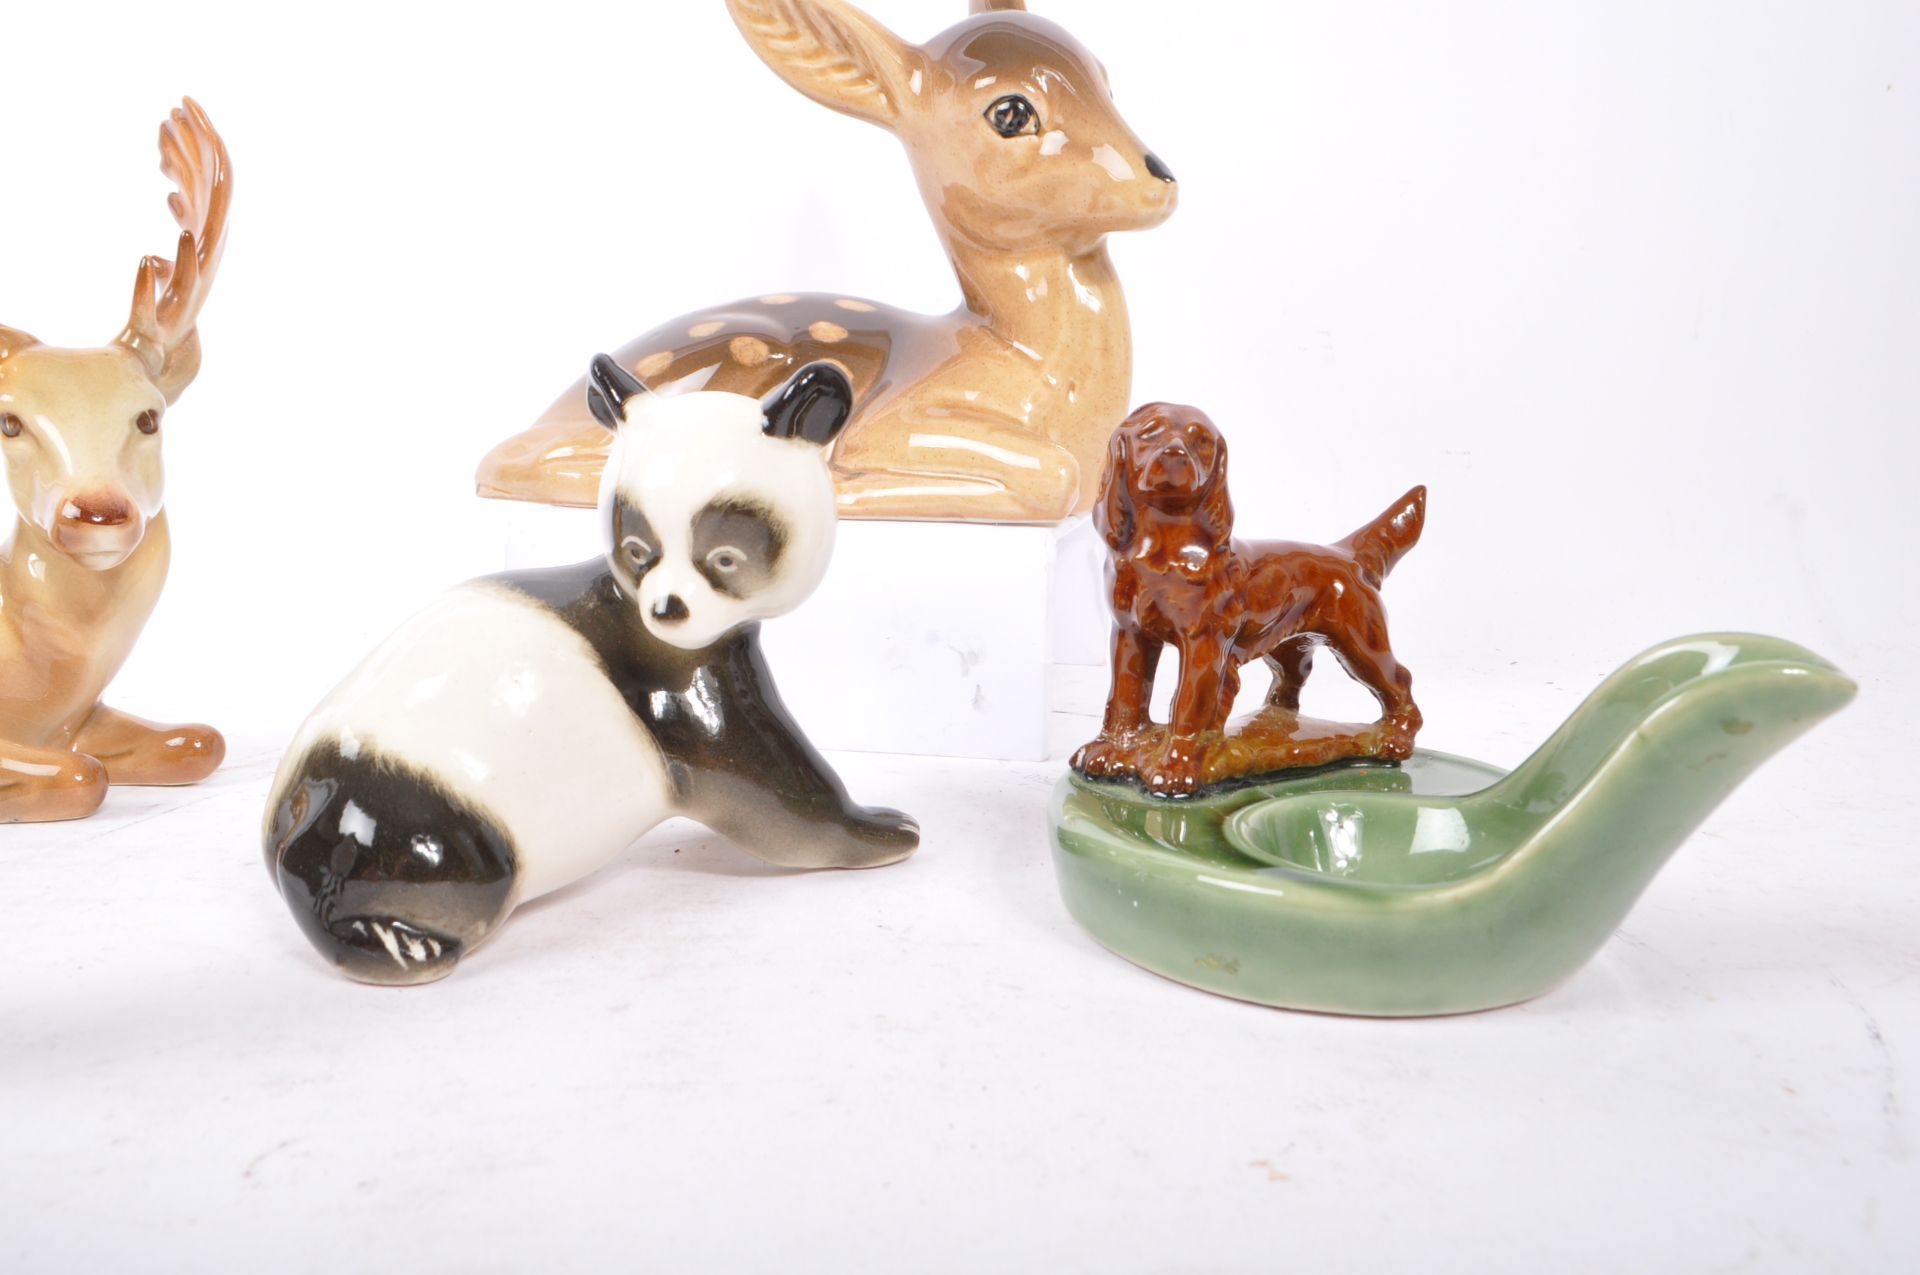 COLLECTION OF BESWICK WADE DUCHY CERAMIC PORCELAIN FIGURINES - Image 4 of 10